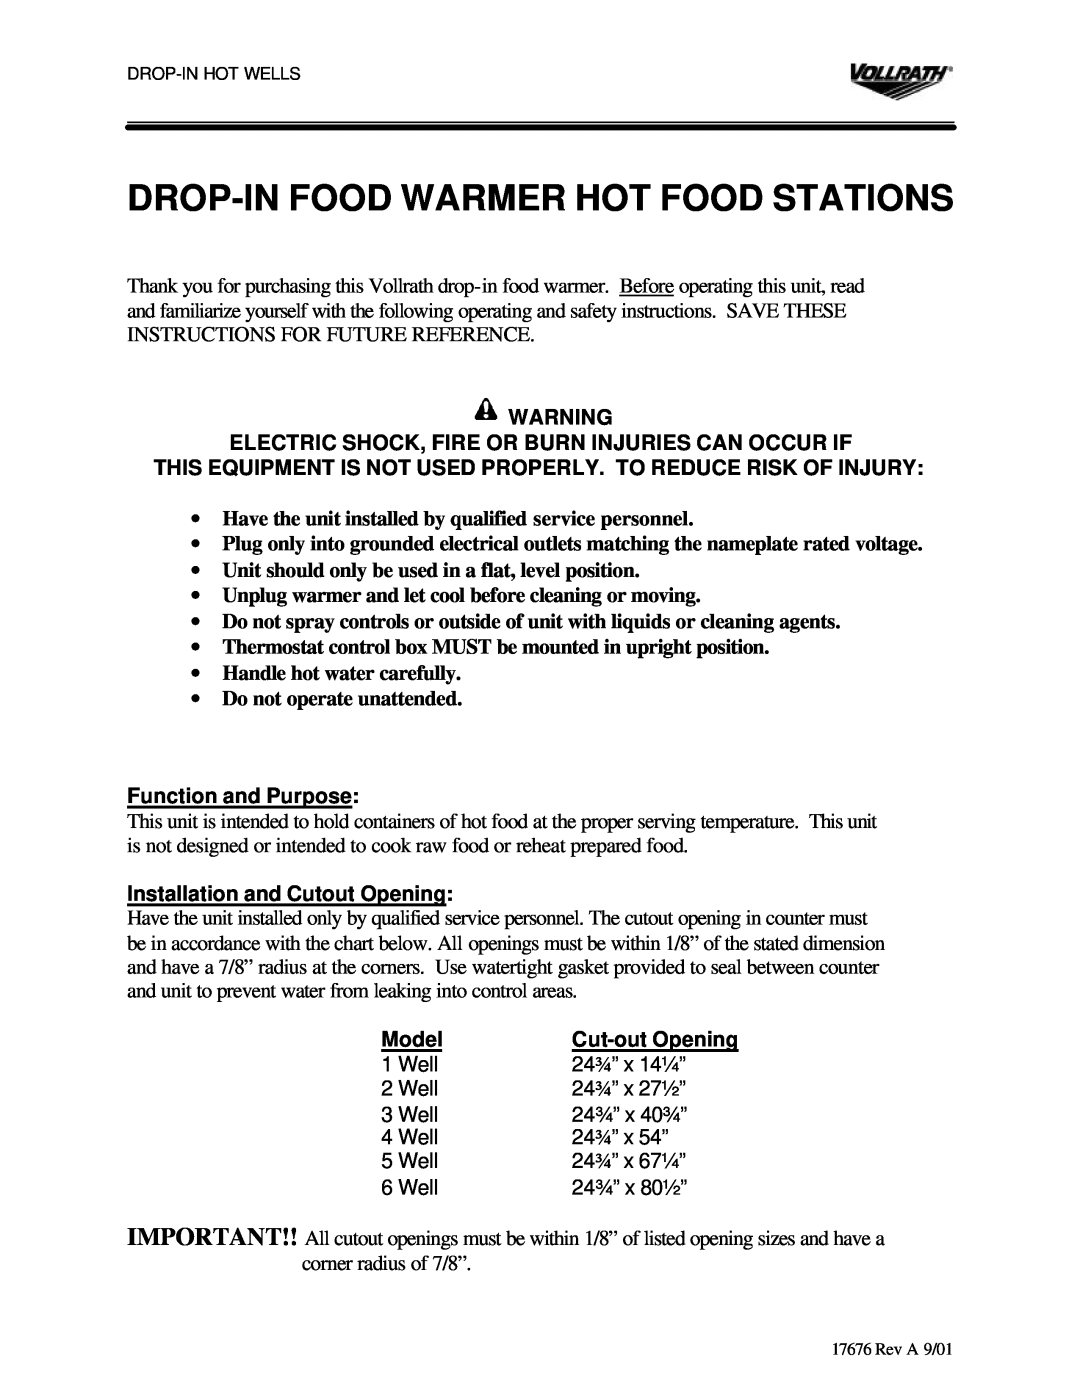 The Vollrath Co Drop-In Hot Wells manual Drop-Infood Warmer Hot Food Stations, Function and Purpose, Model, Cut-outOpening 